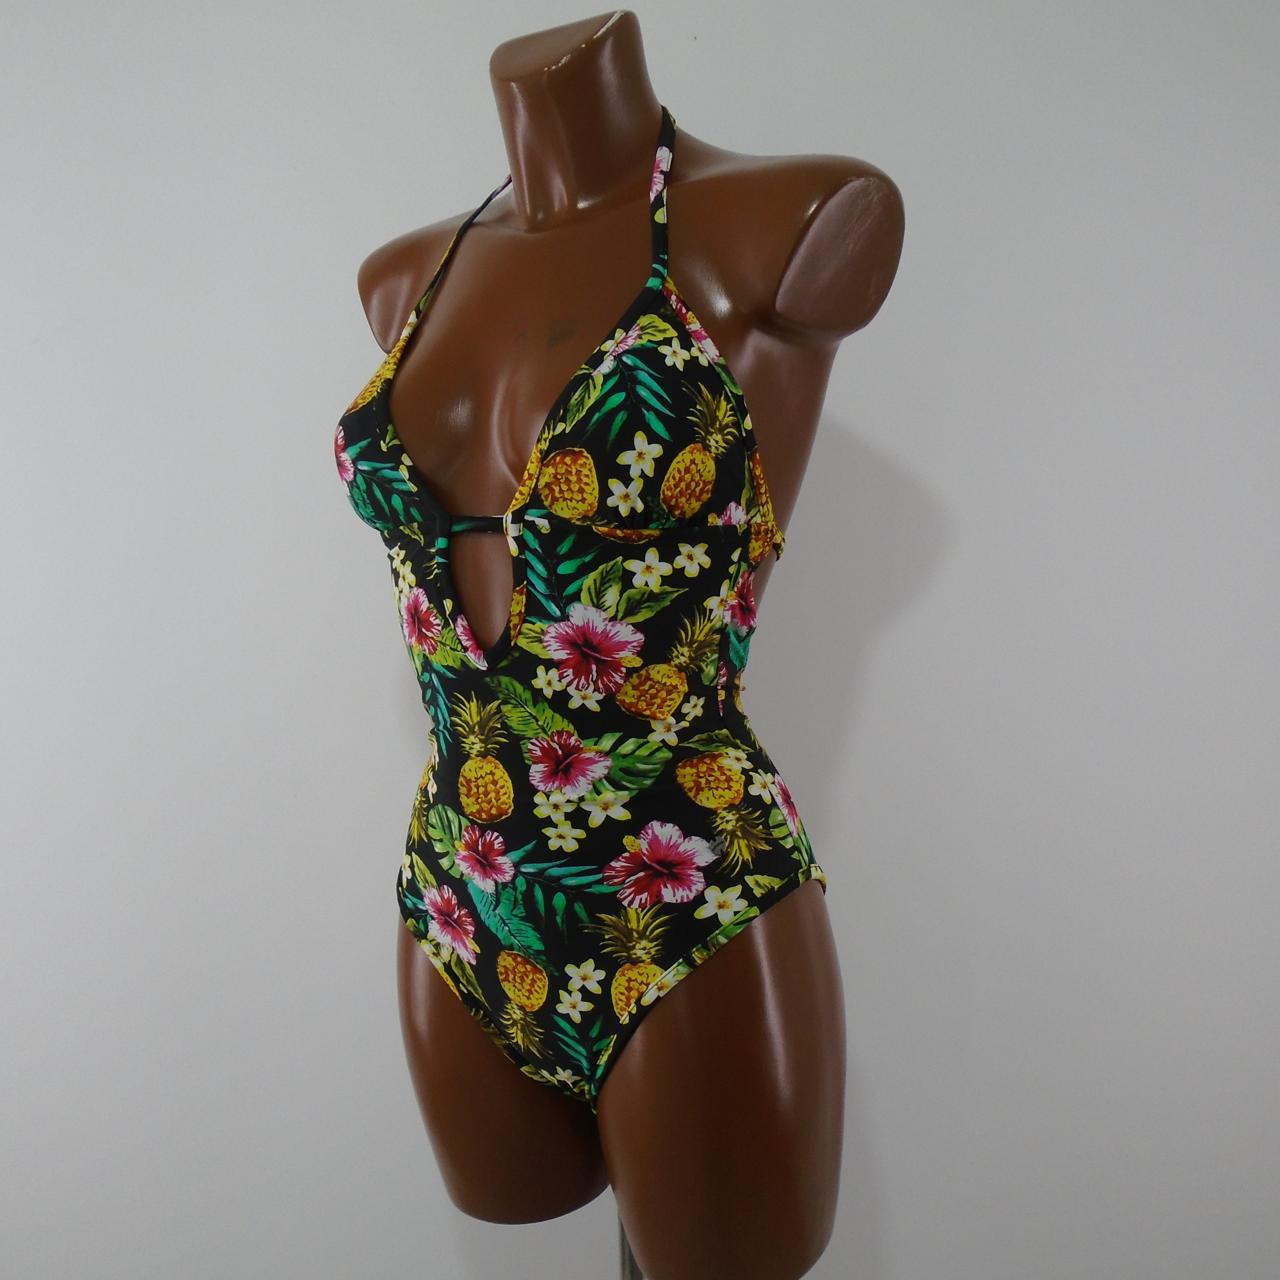 Women's Swimsuit Superdry. Multicolor. XS. Used. Good